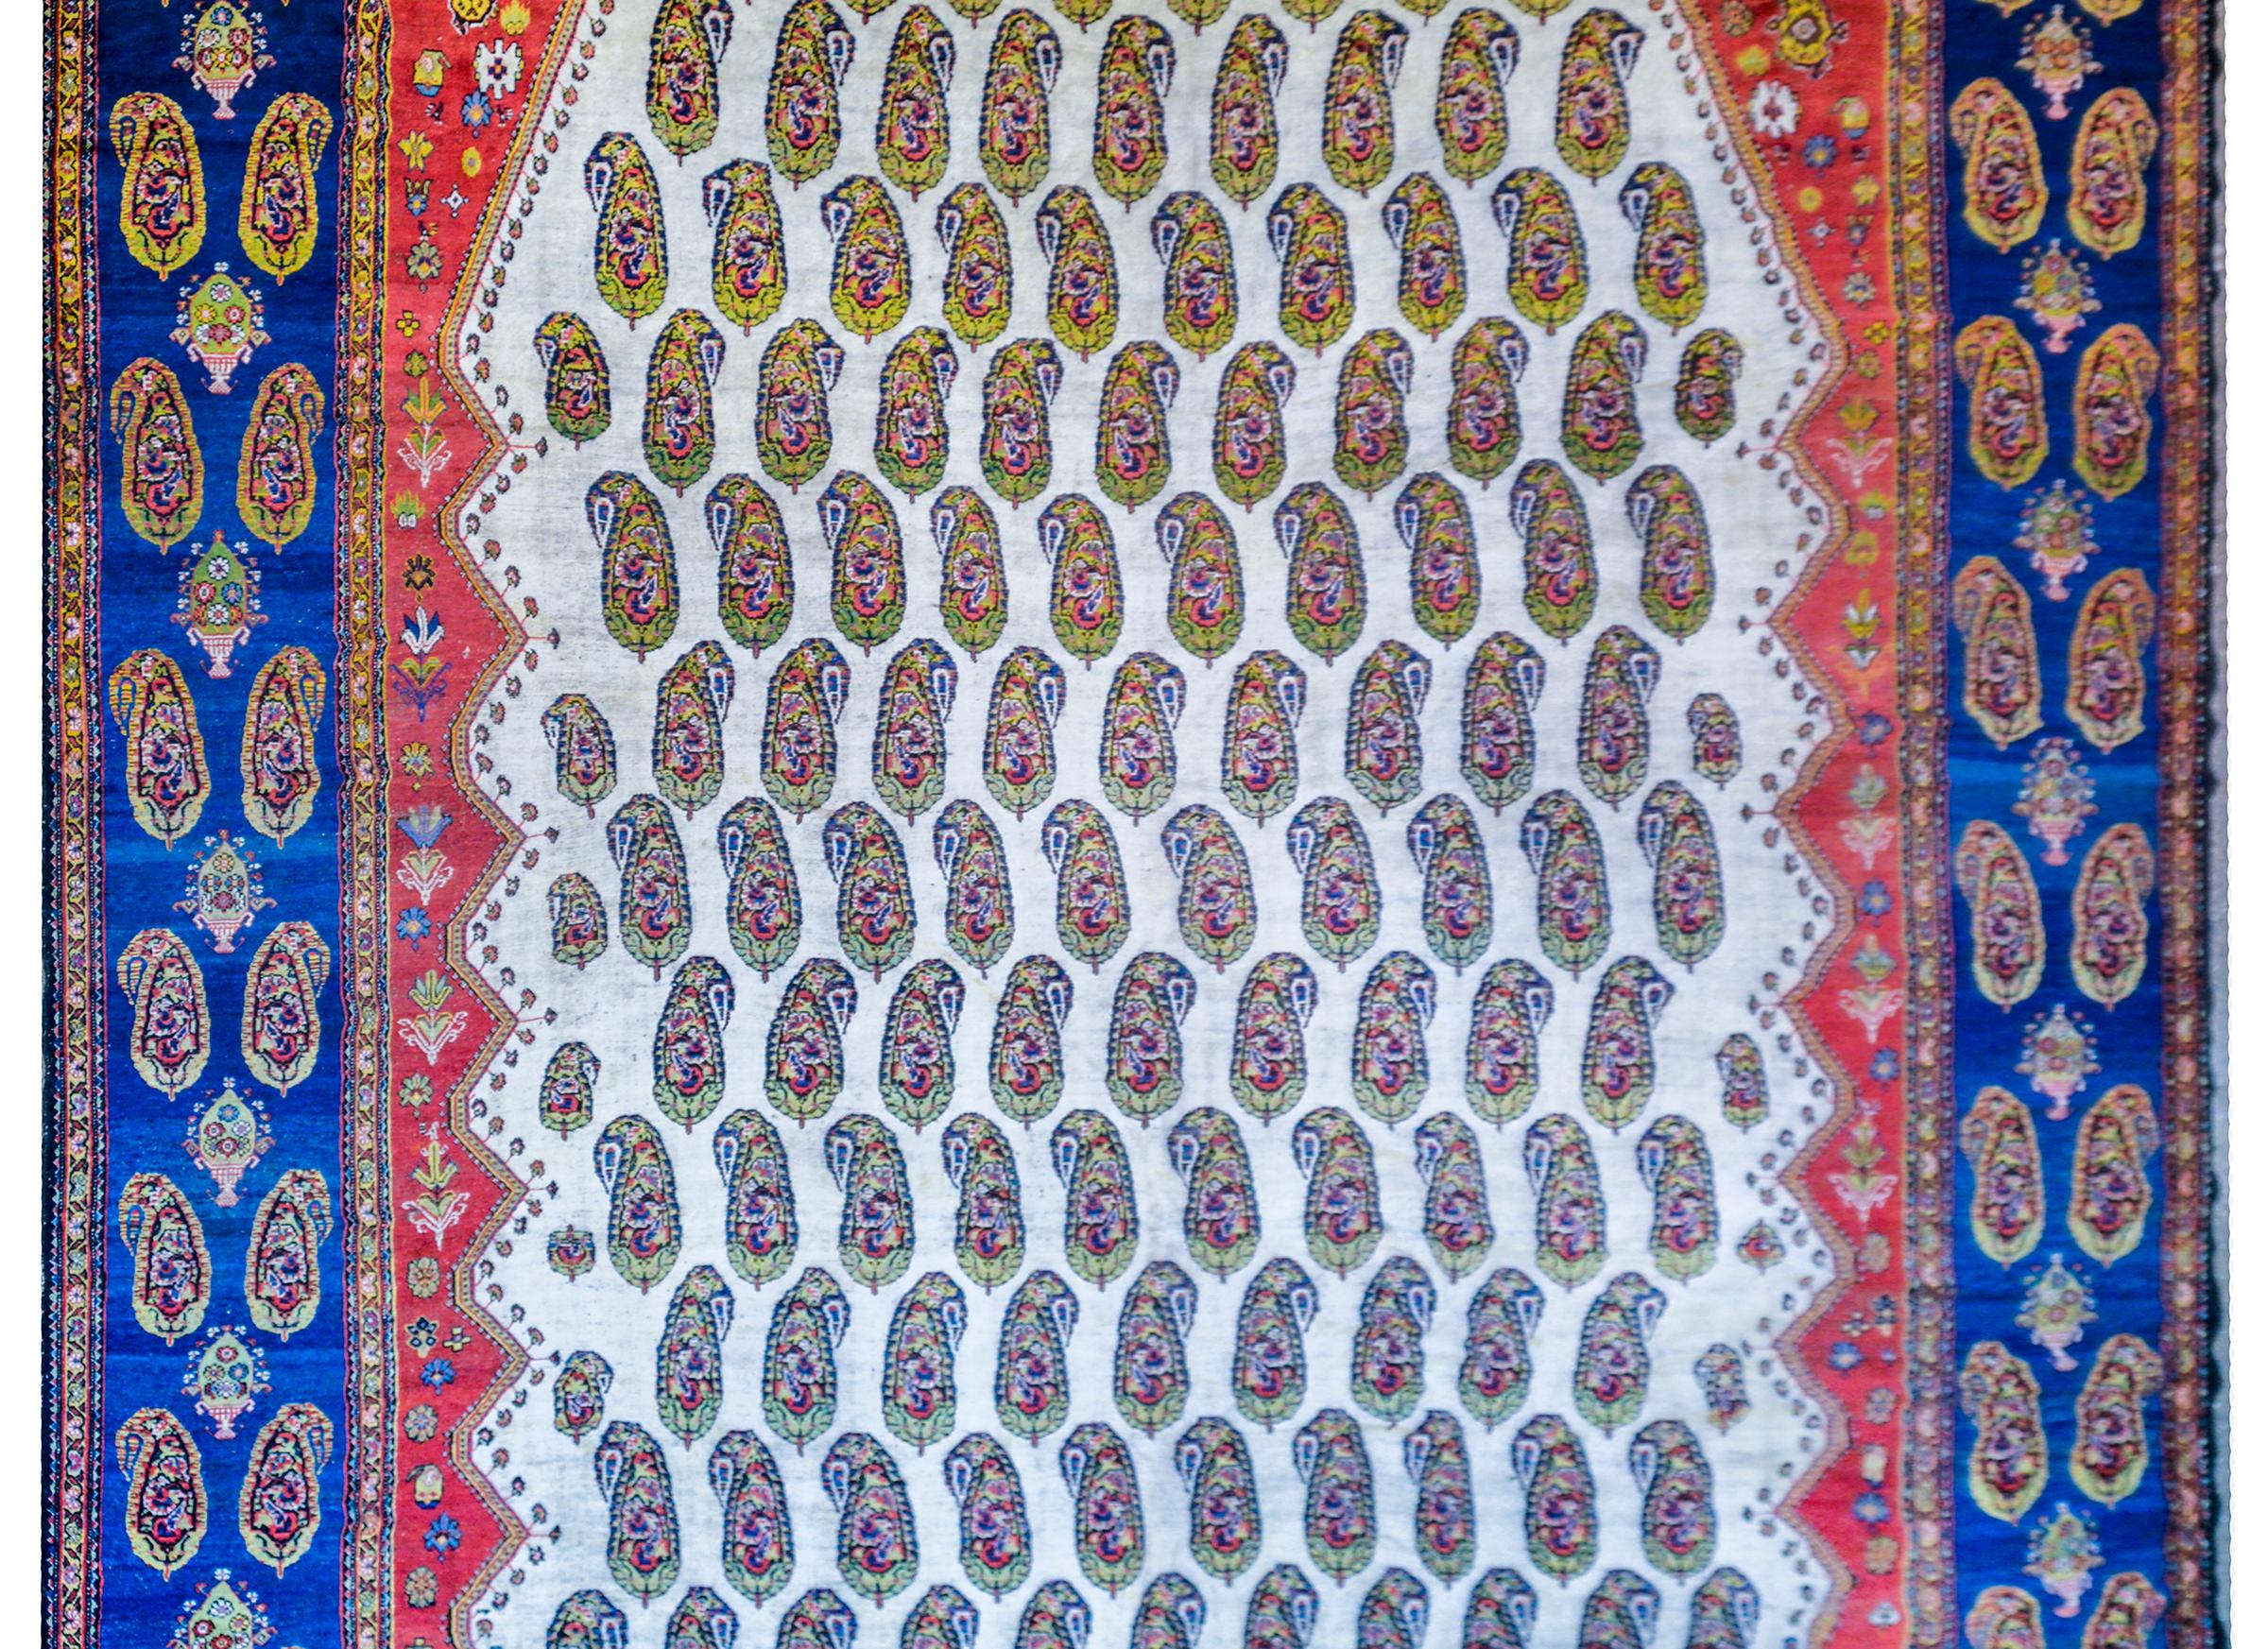 An incredible early 20th century Persian Khamseh rug with an all-over multicolored paisley pattern on a white background surrounded by a complimentary border of multicolored paisleys on an indigo background.